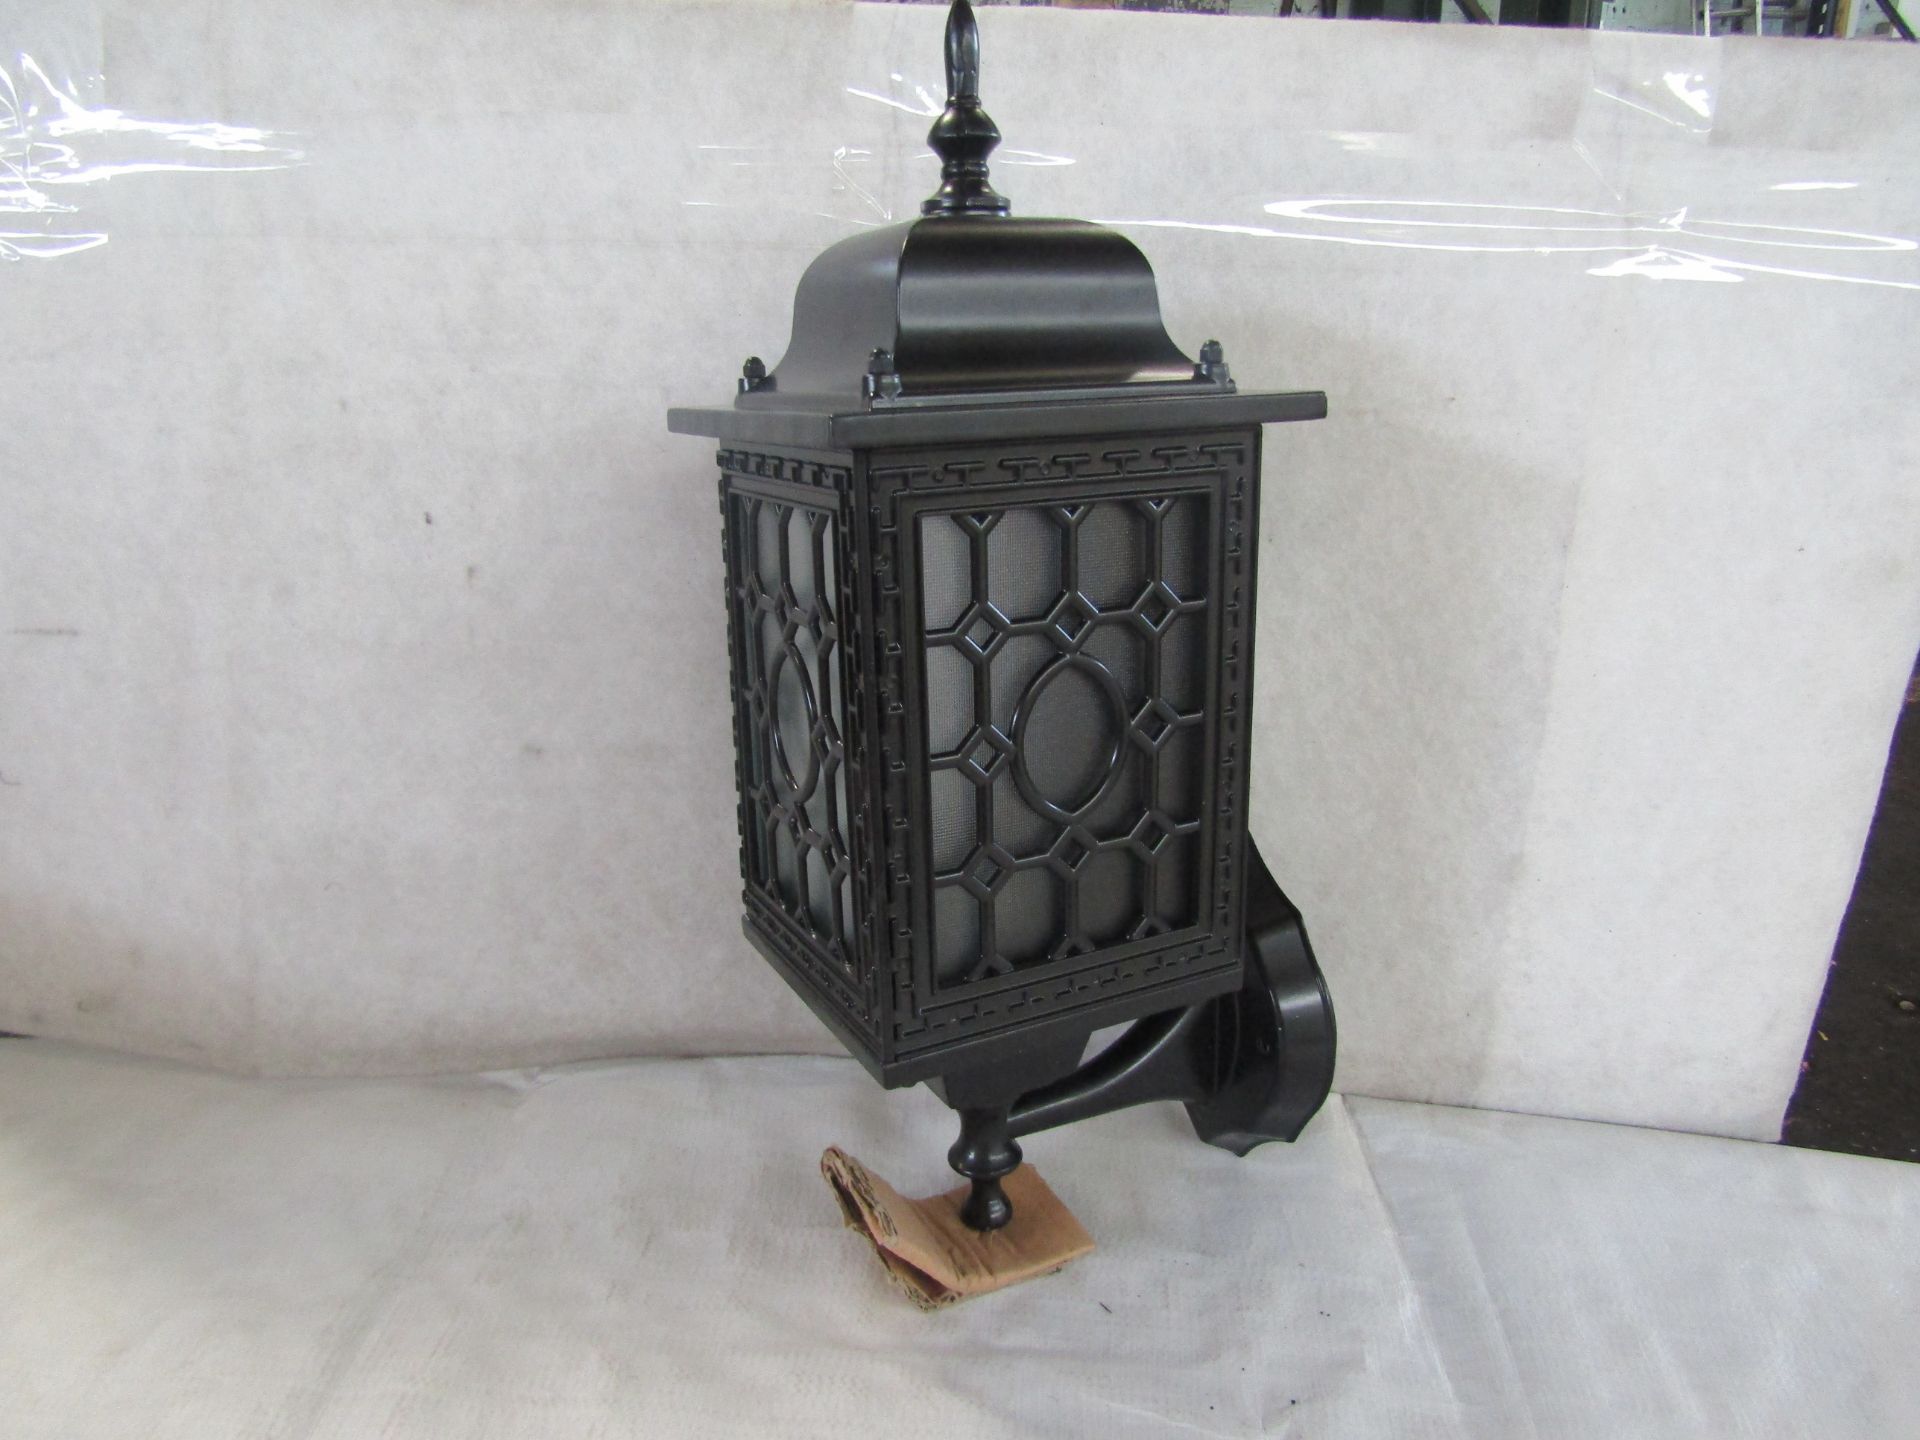 Integrity Lighting black outdoor lantern. H43CM X W16CM. New & Boxed (boxes are shop soiled) (